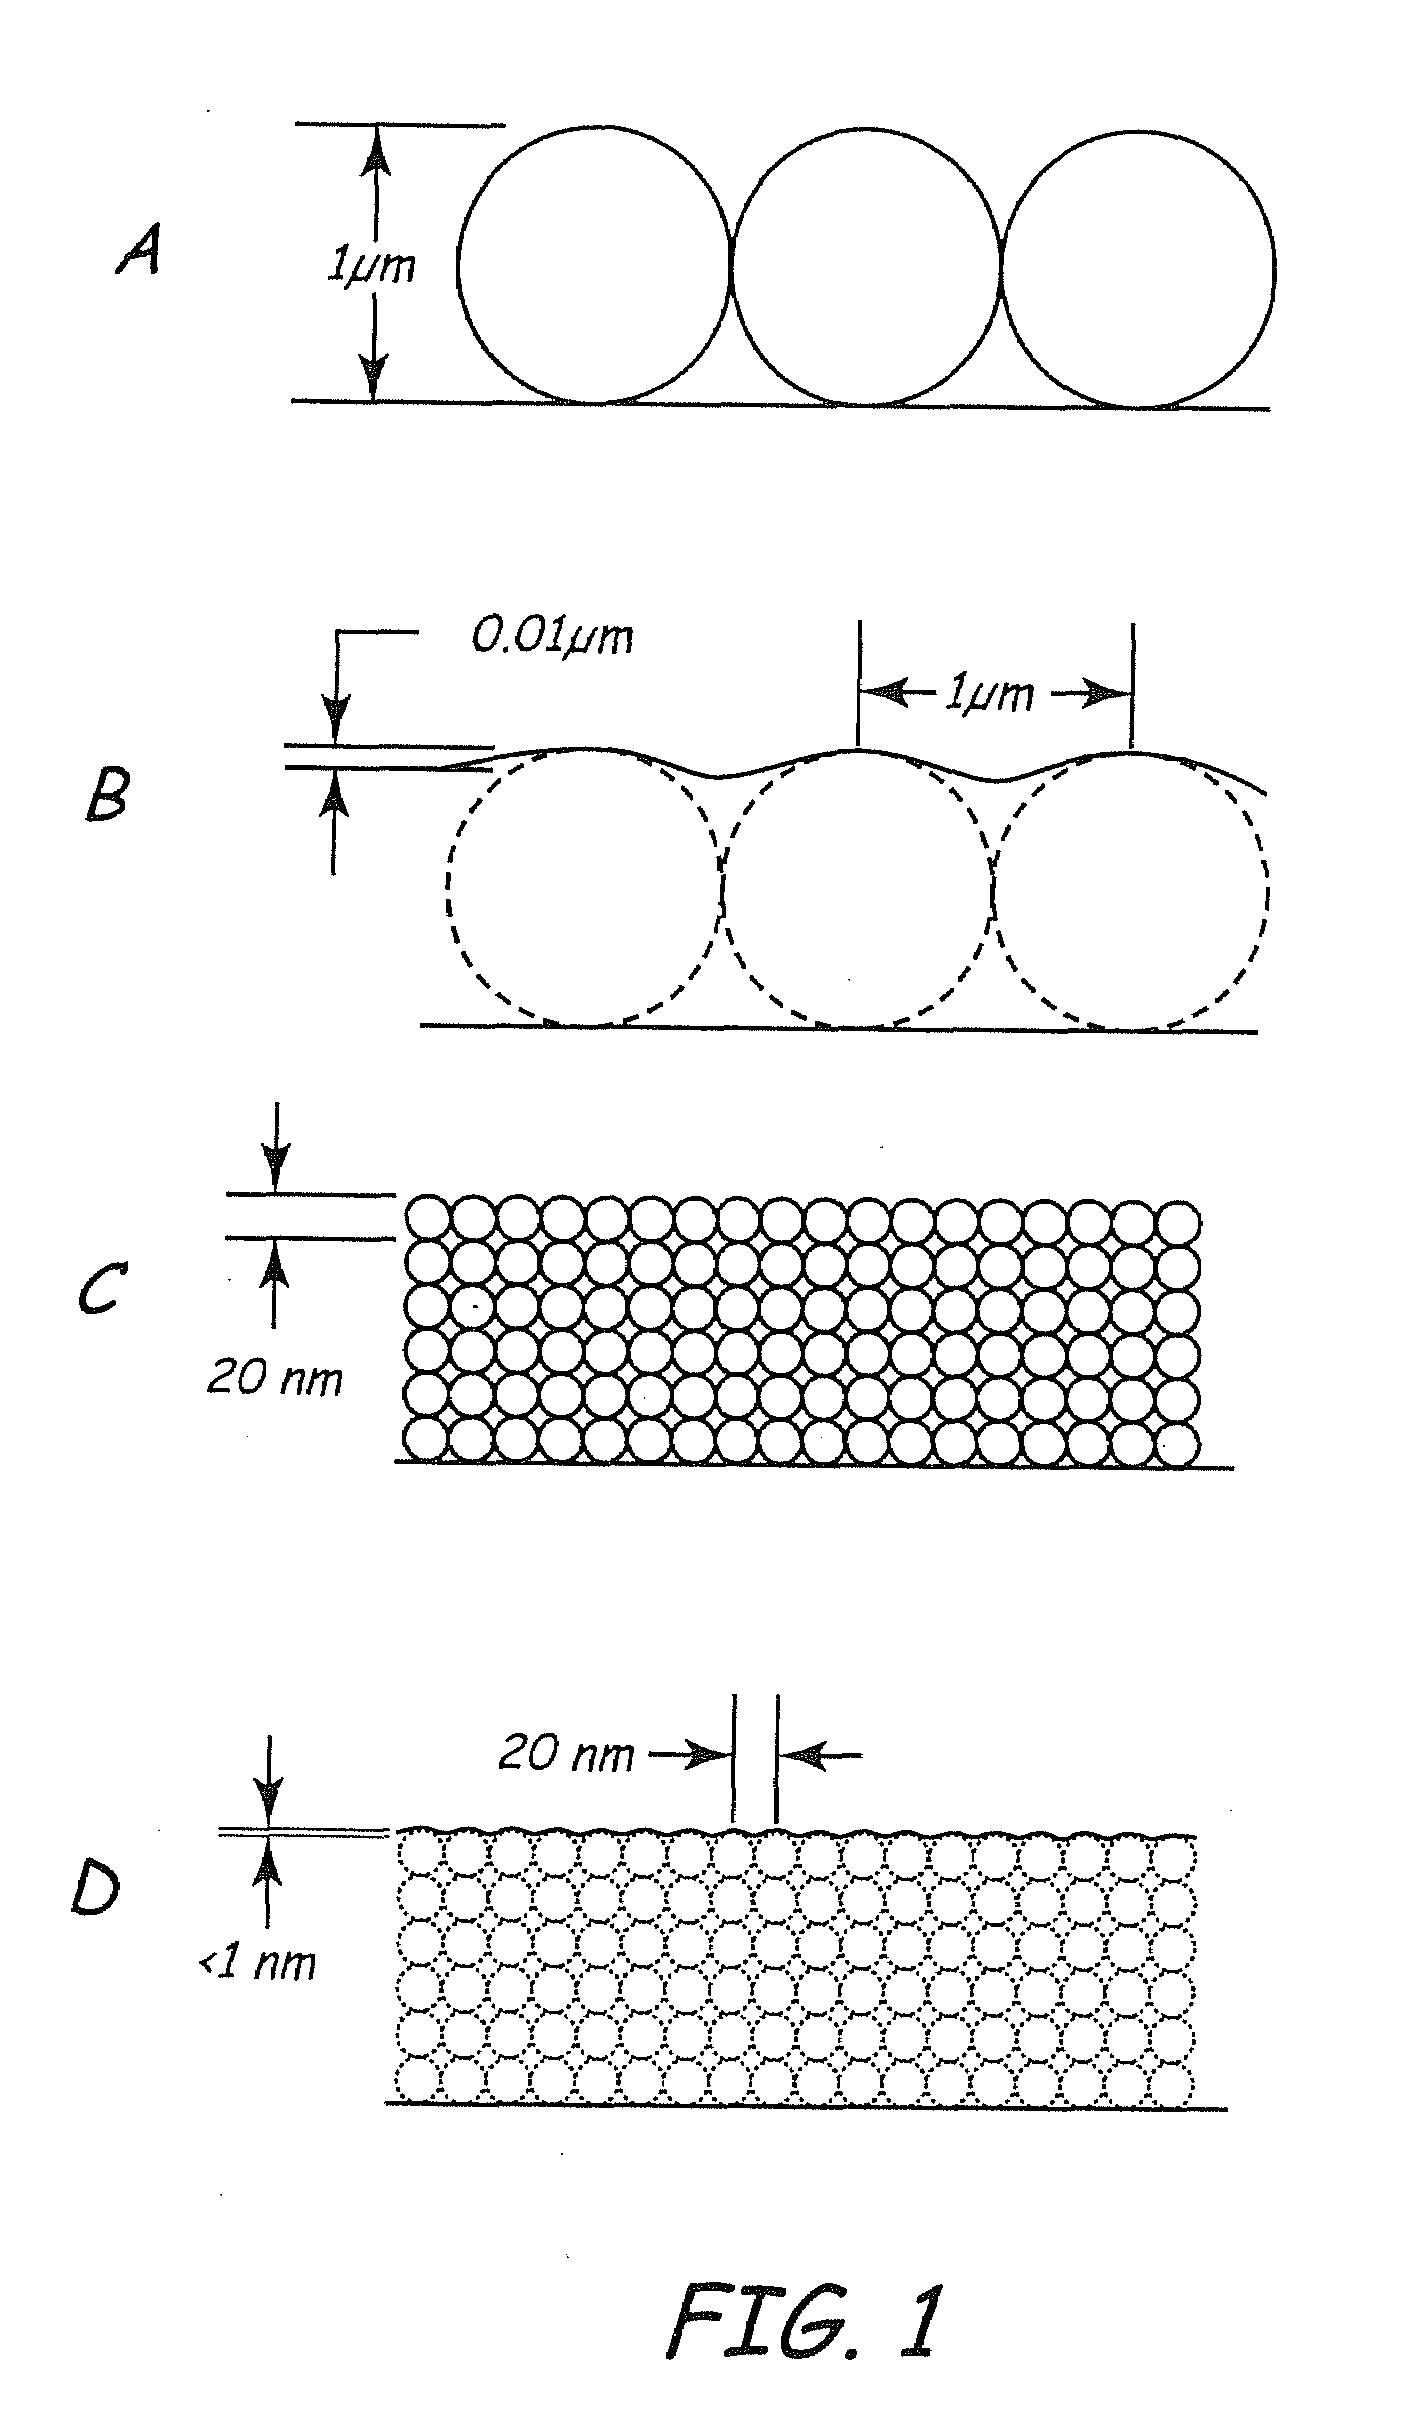 Coating formation by reactive deposition